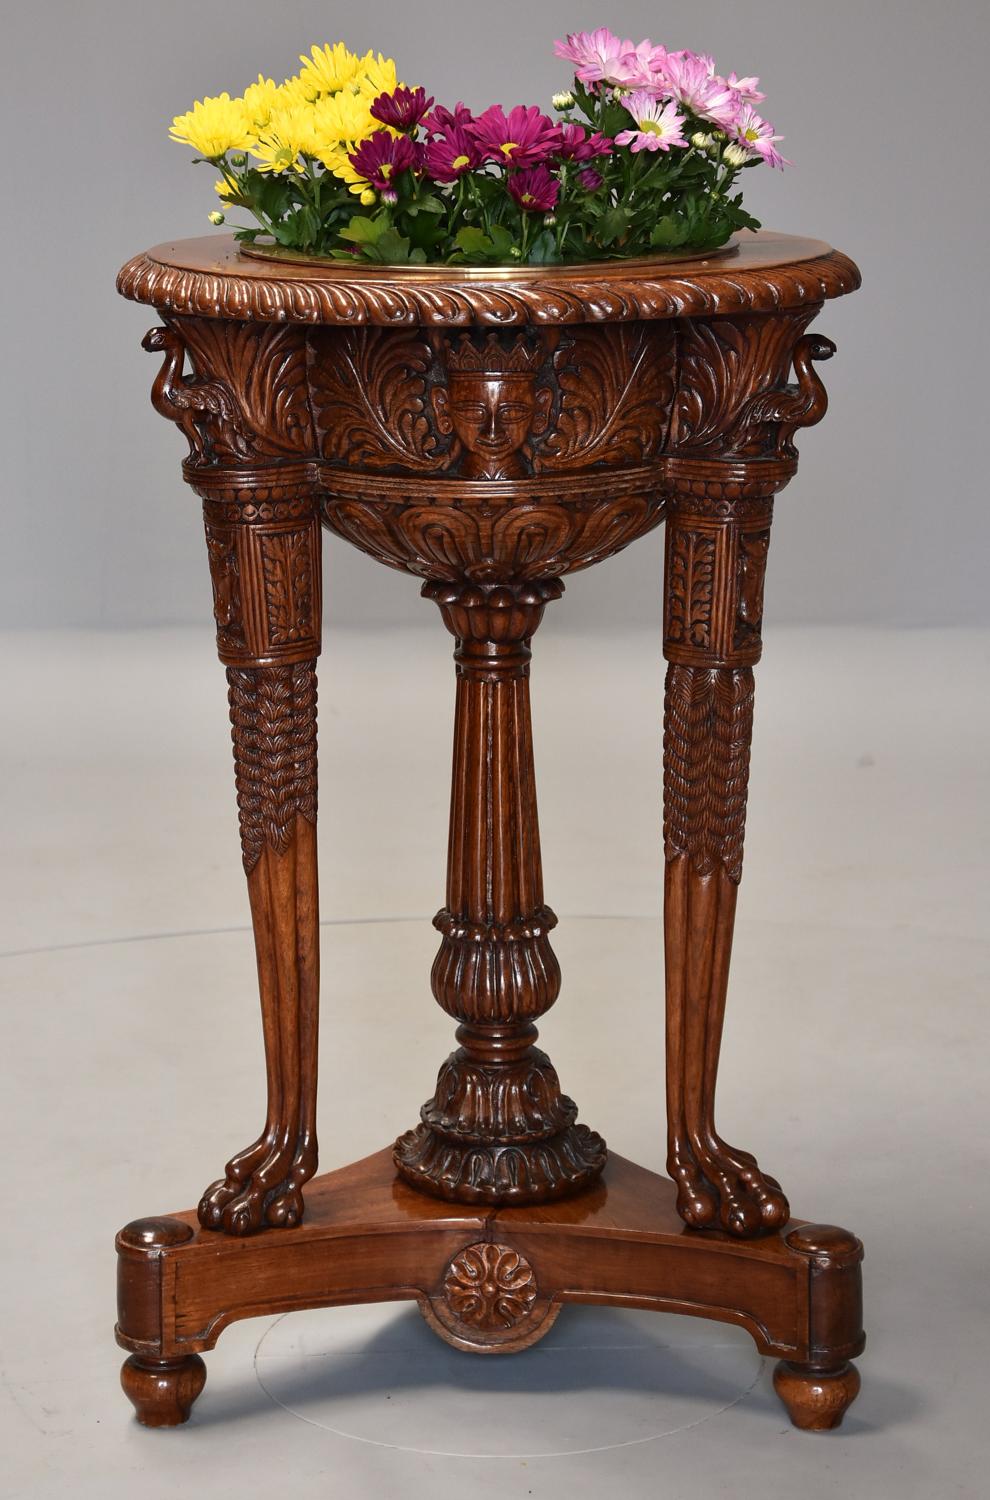 Late 19thc Indian padouk carved jardiniere or wine cooler